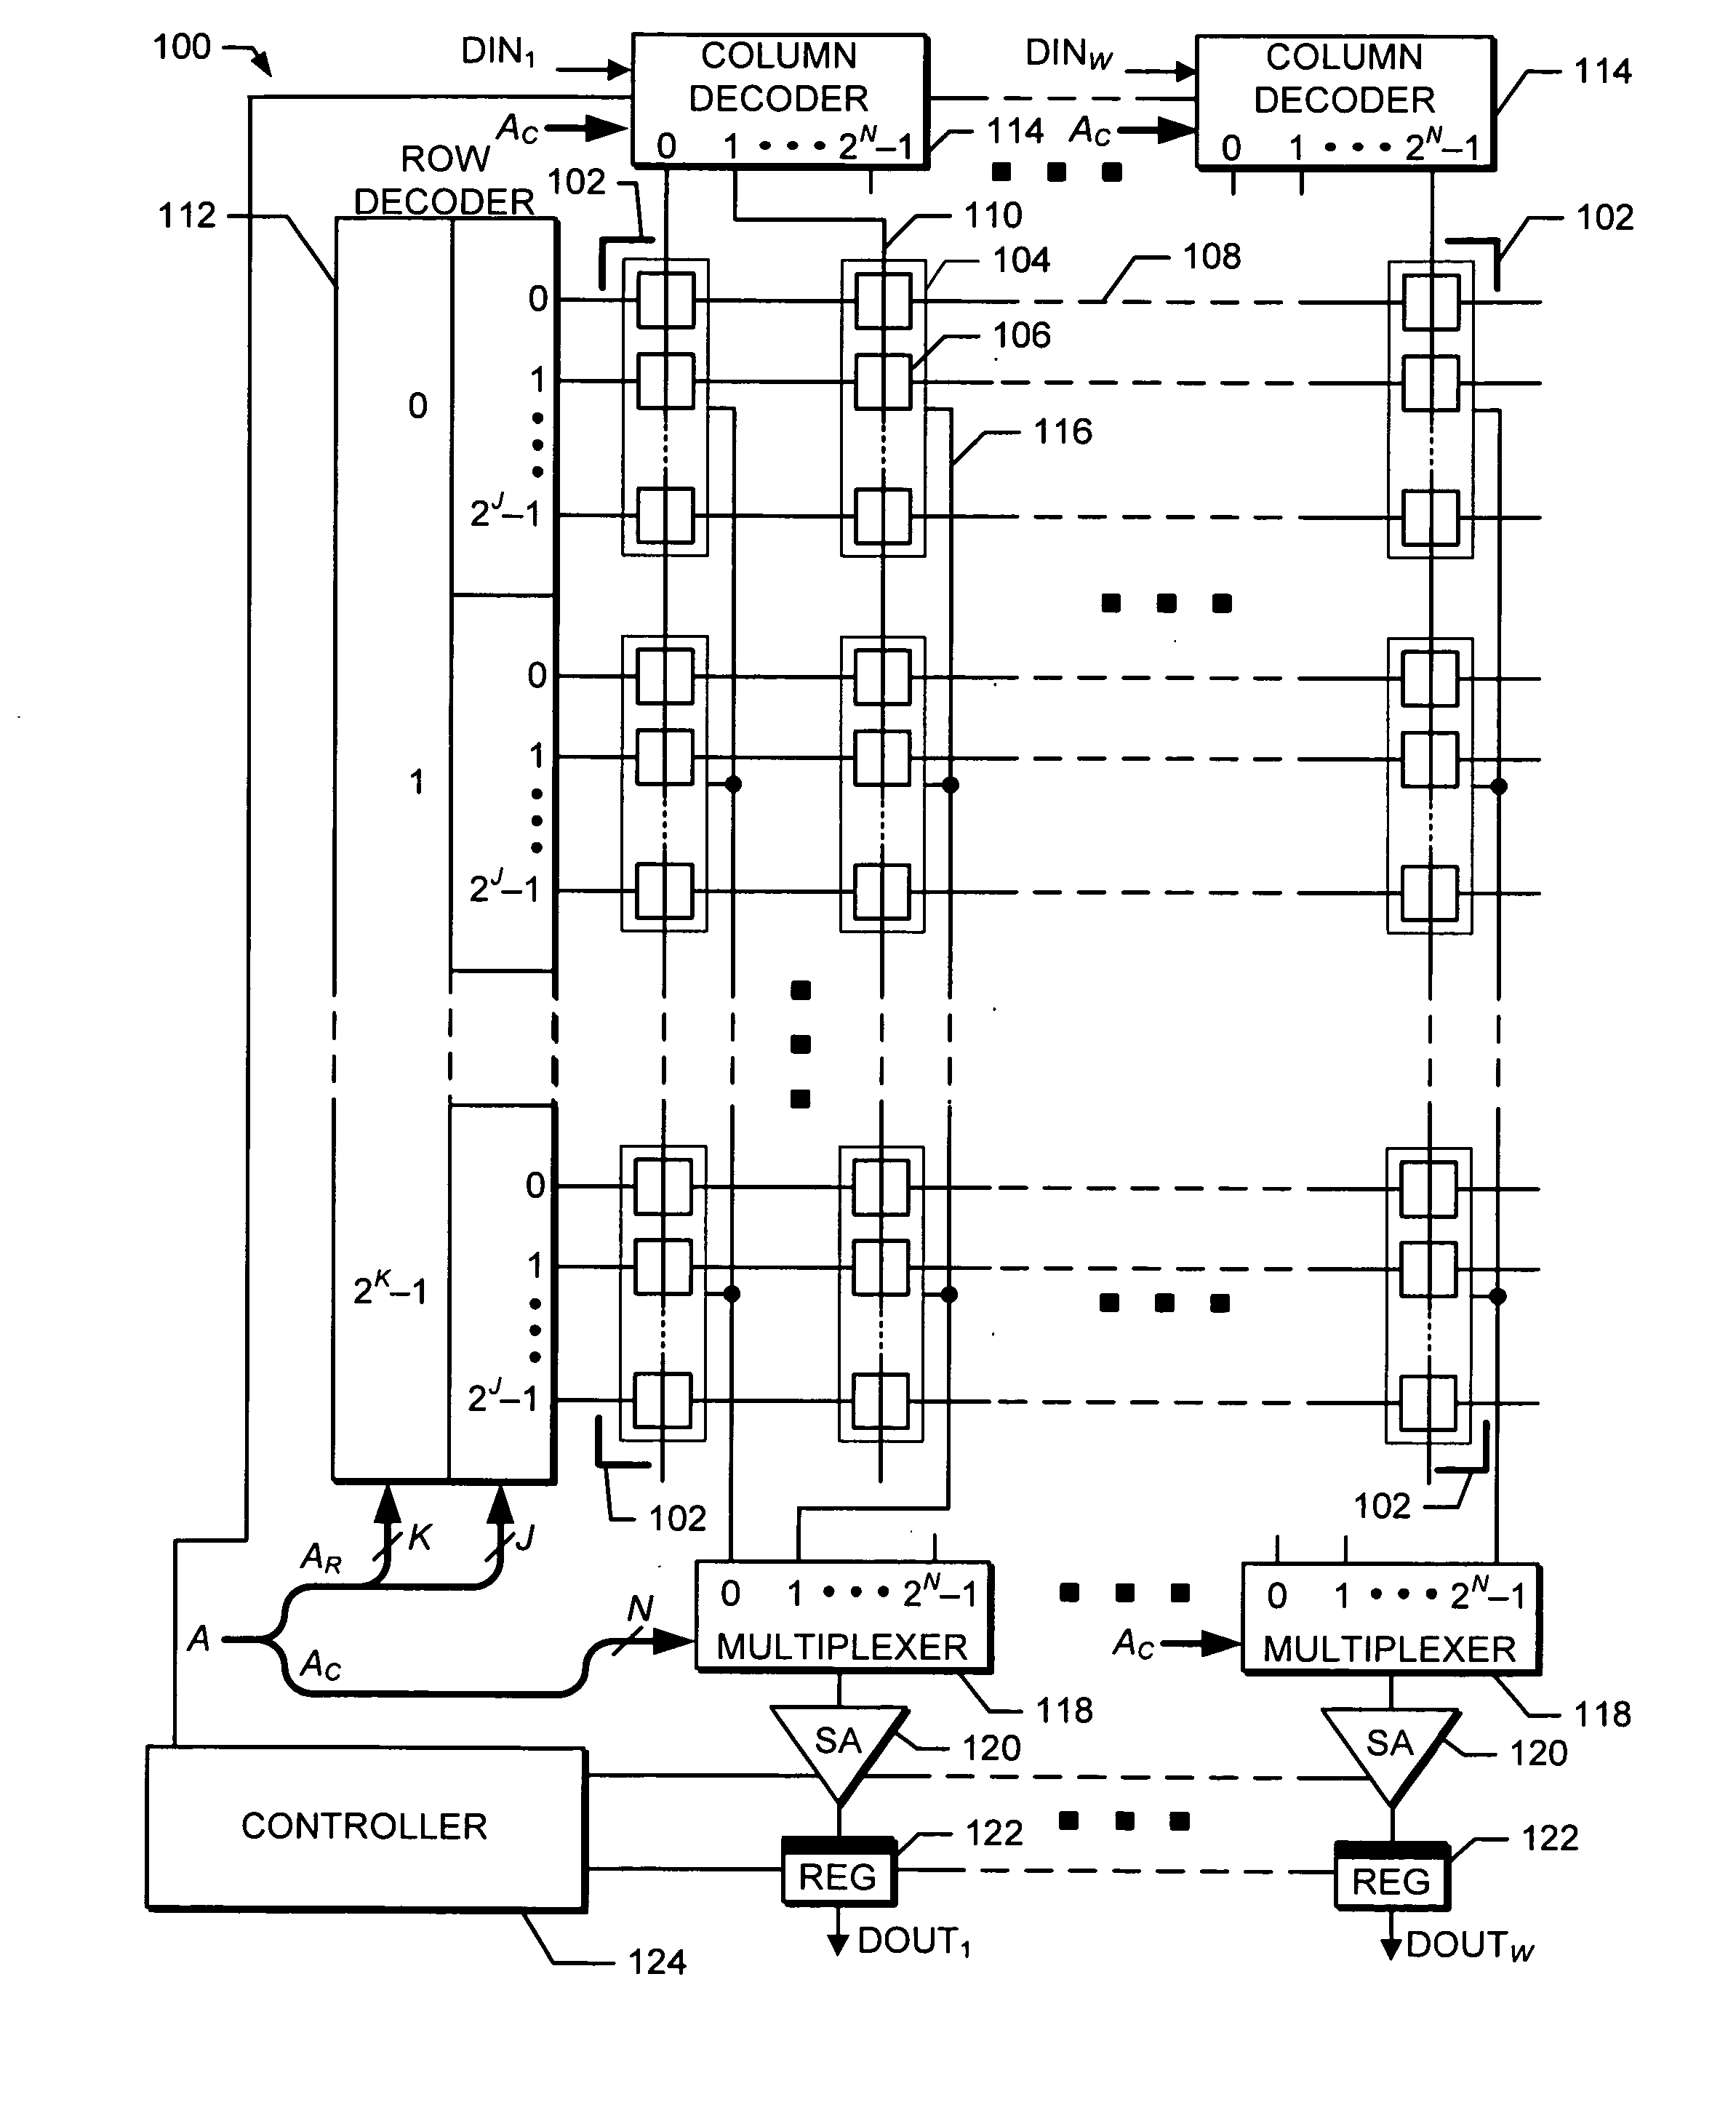 Method and apparatus for a sense amplifier